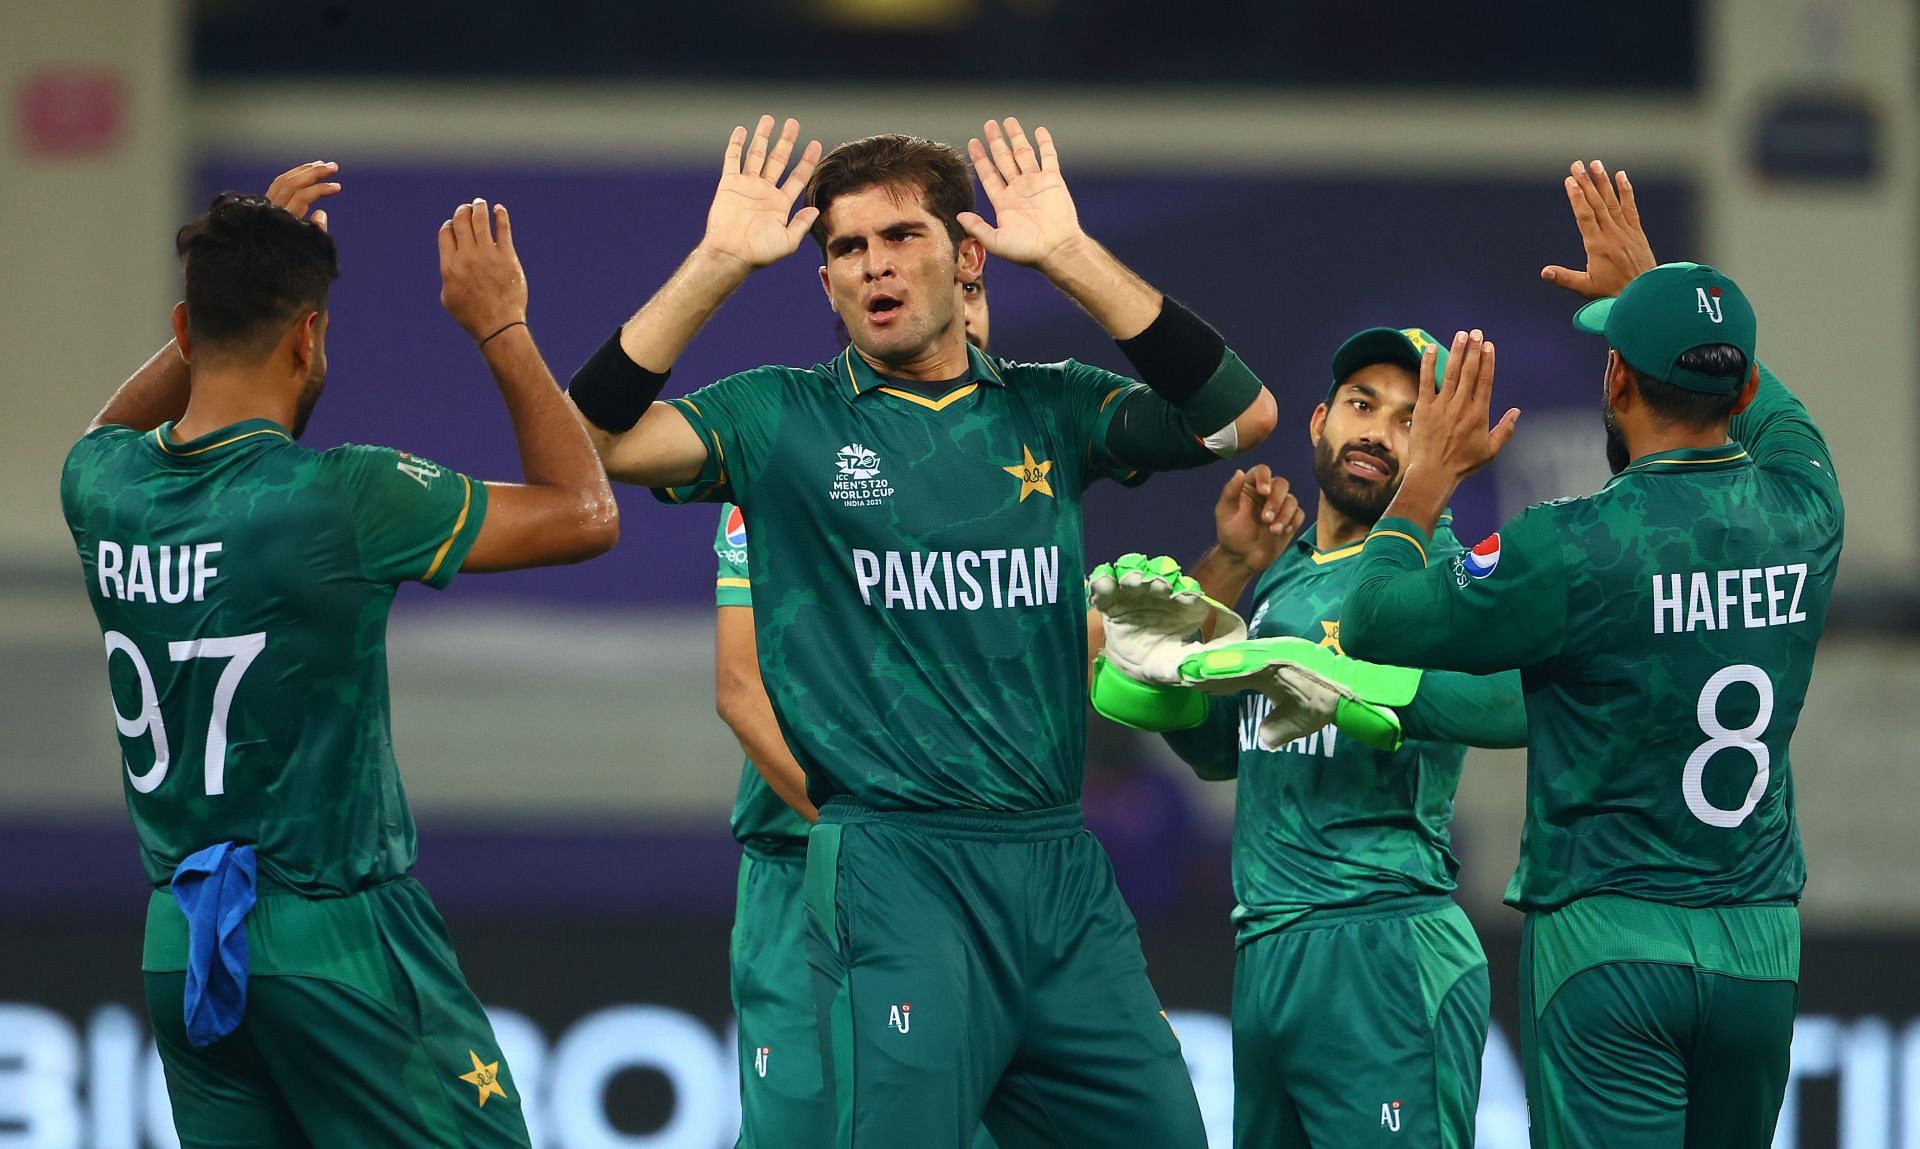 Shaheen Shah Afridi was duly selected for the Player of the Match award